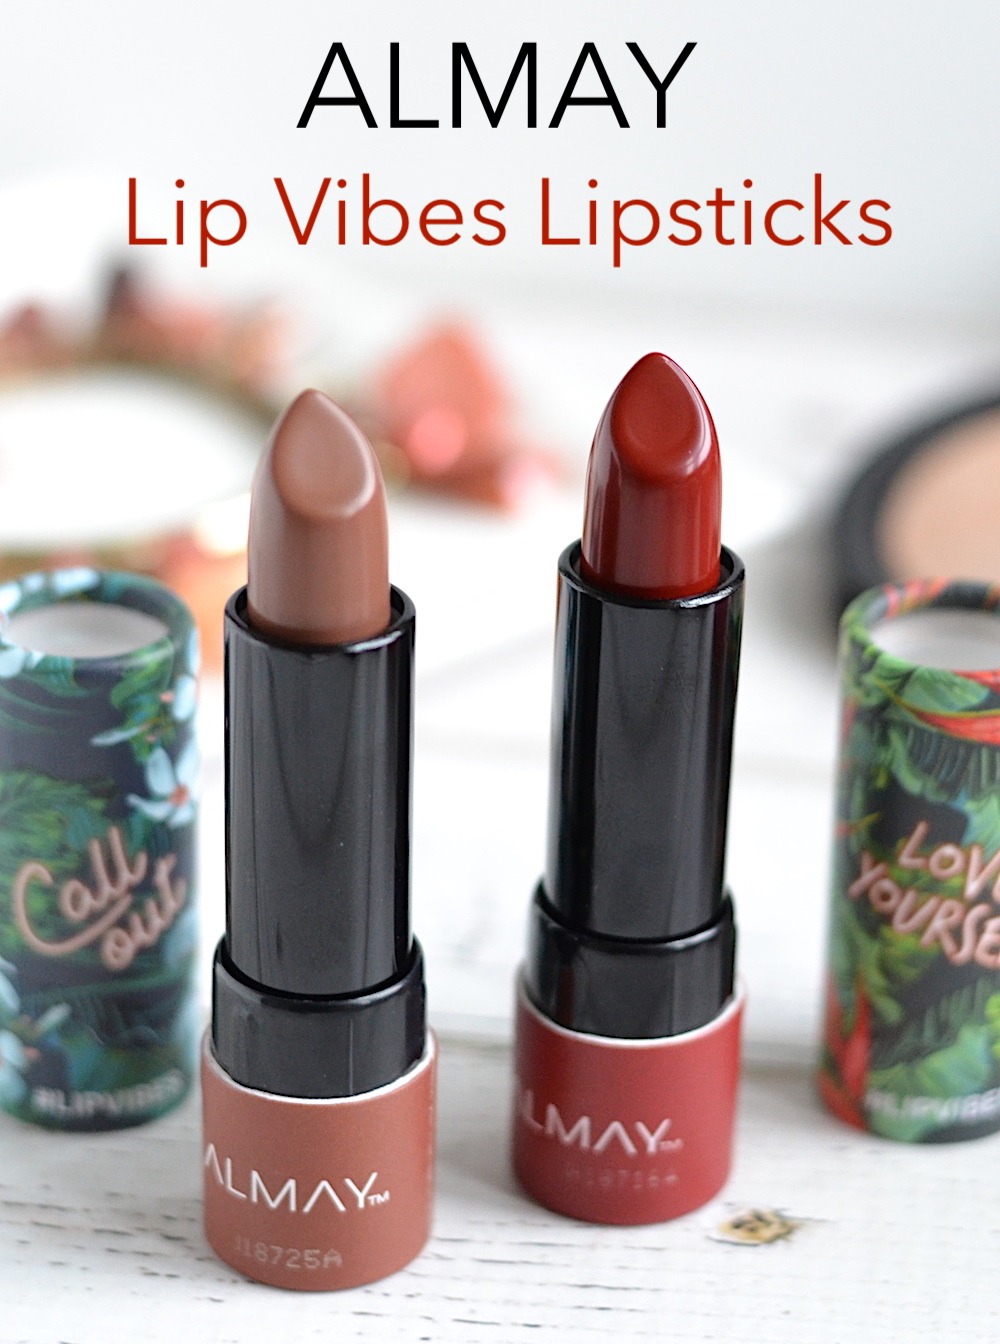 Almay Lip Vibes Lipsticks Review and Swatches